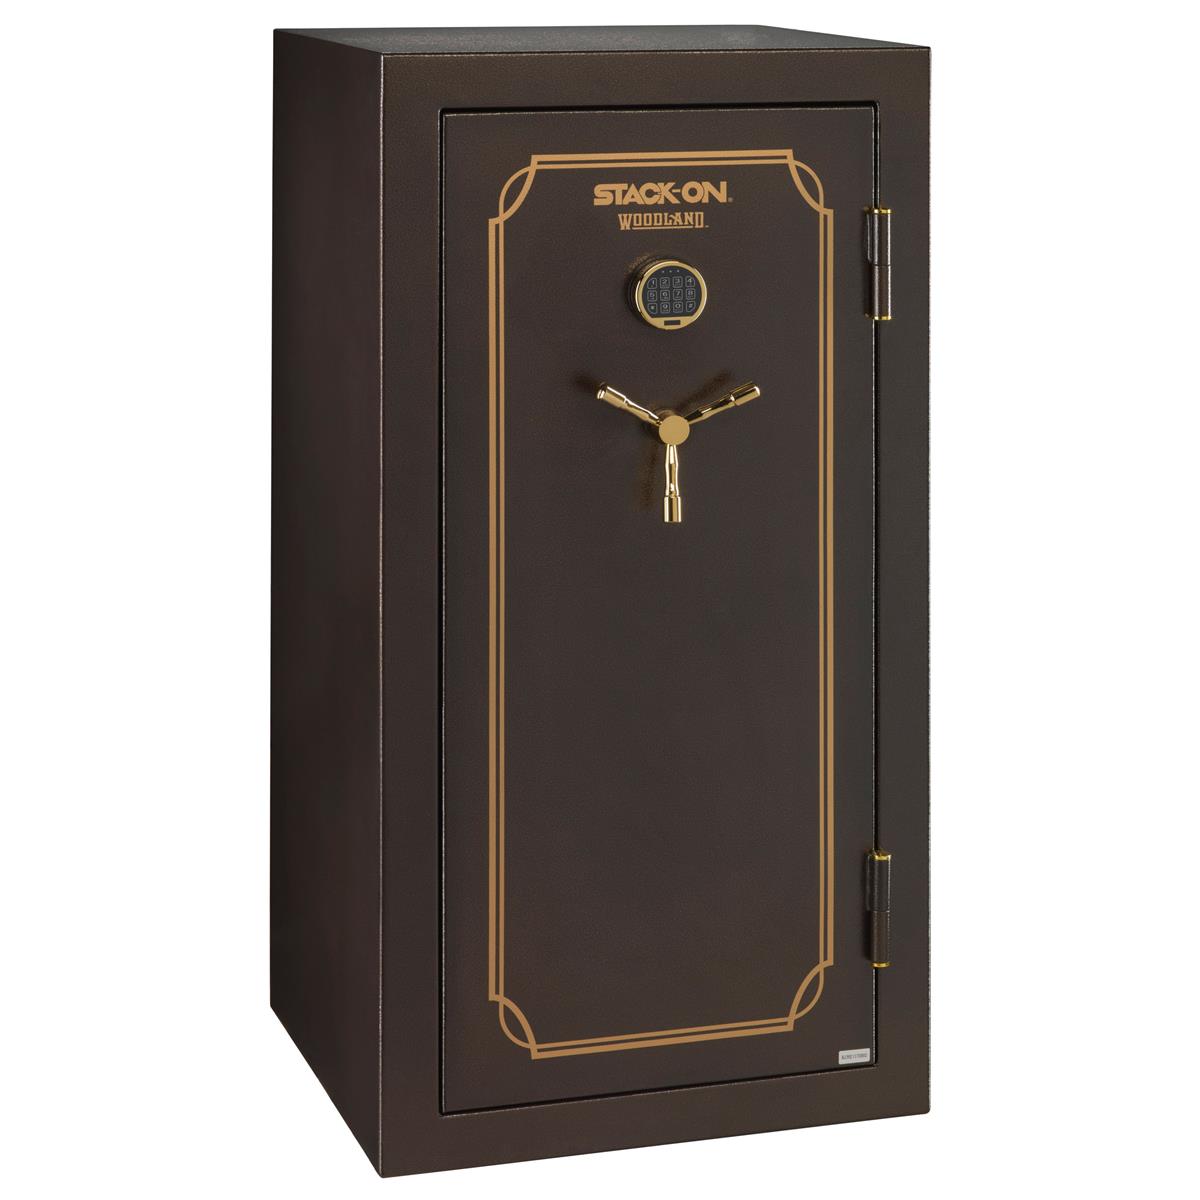 Stack-On 36-40 Gun Capacity Safe with Back-lit Electronic Lock, Brown Hammertone -  W-40-BH-E-S